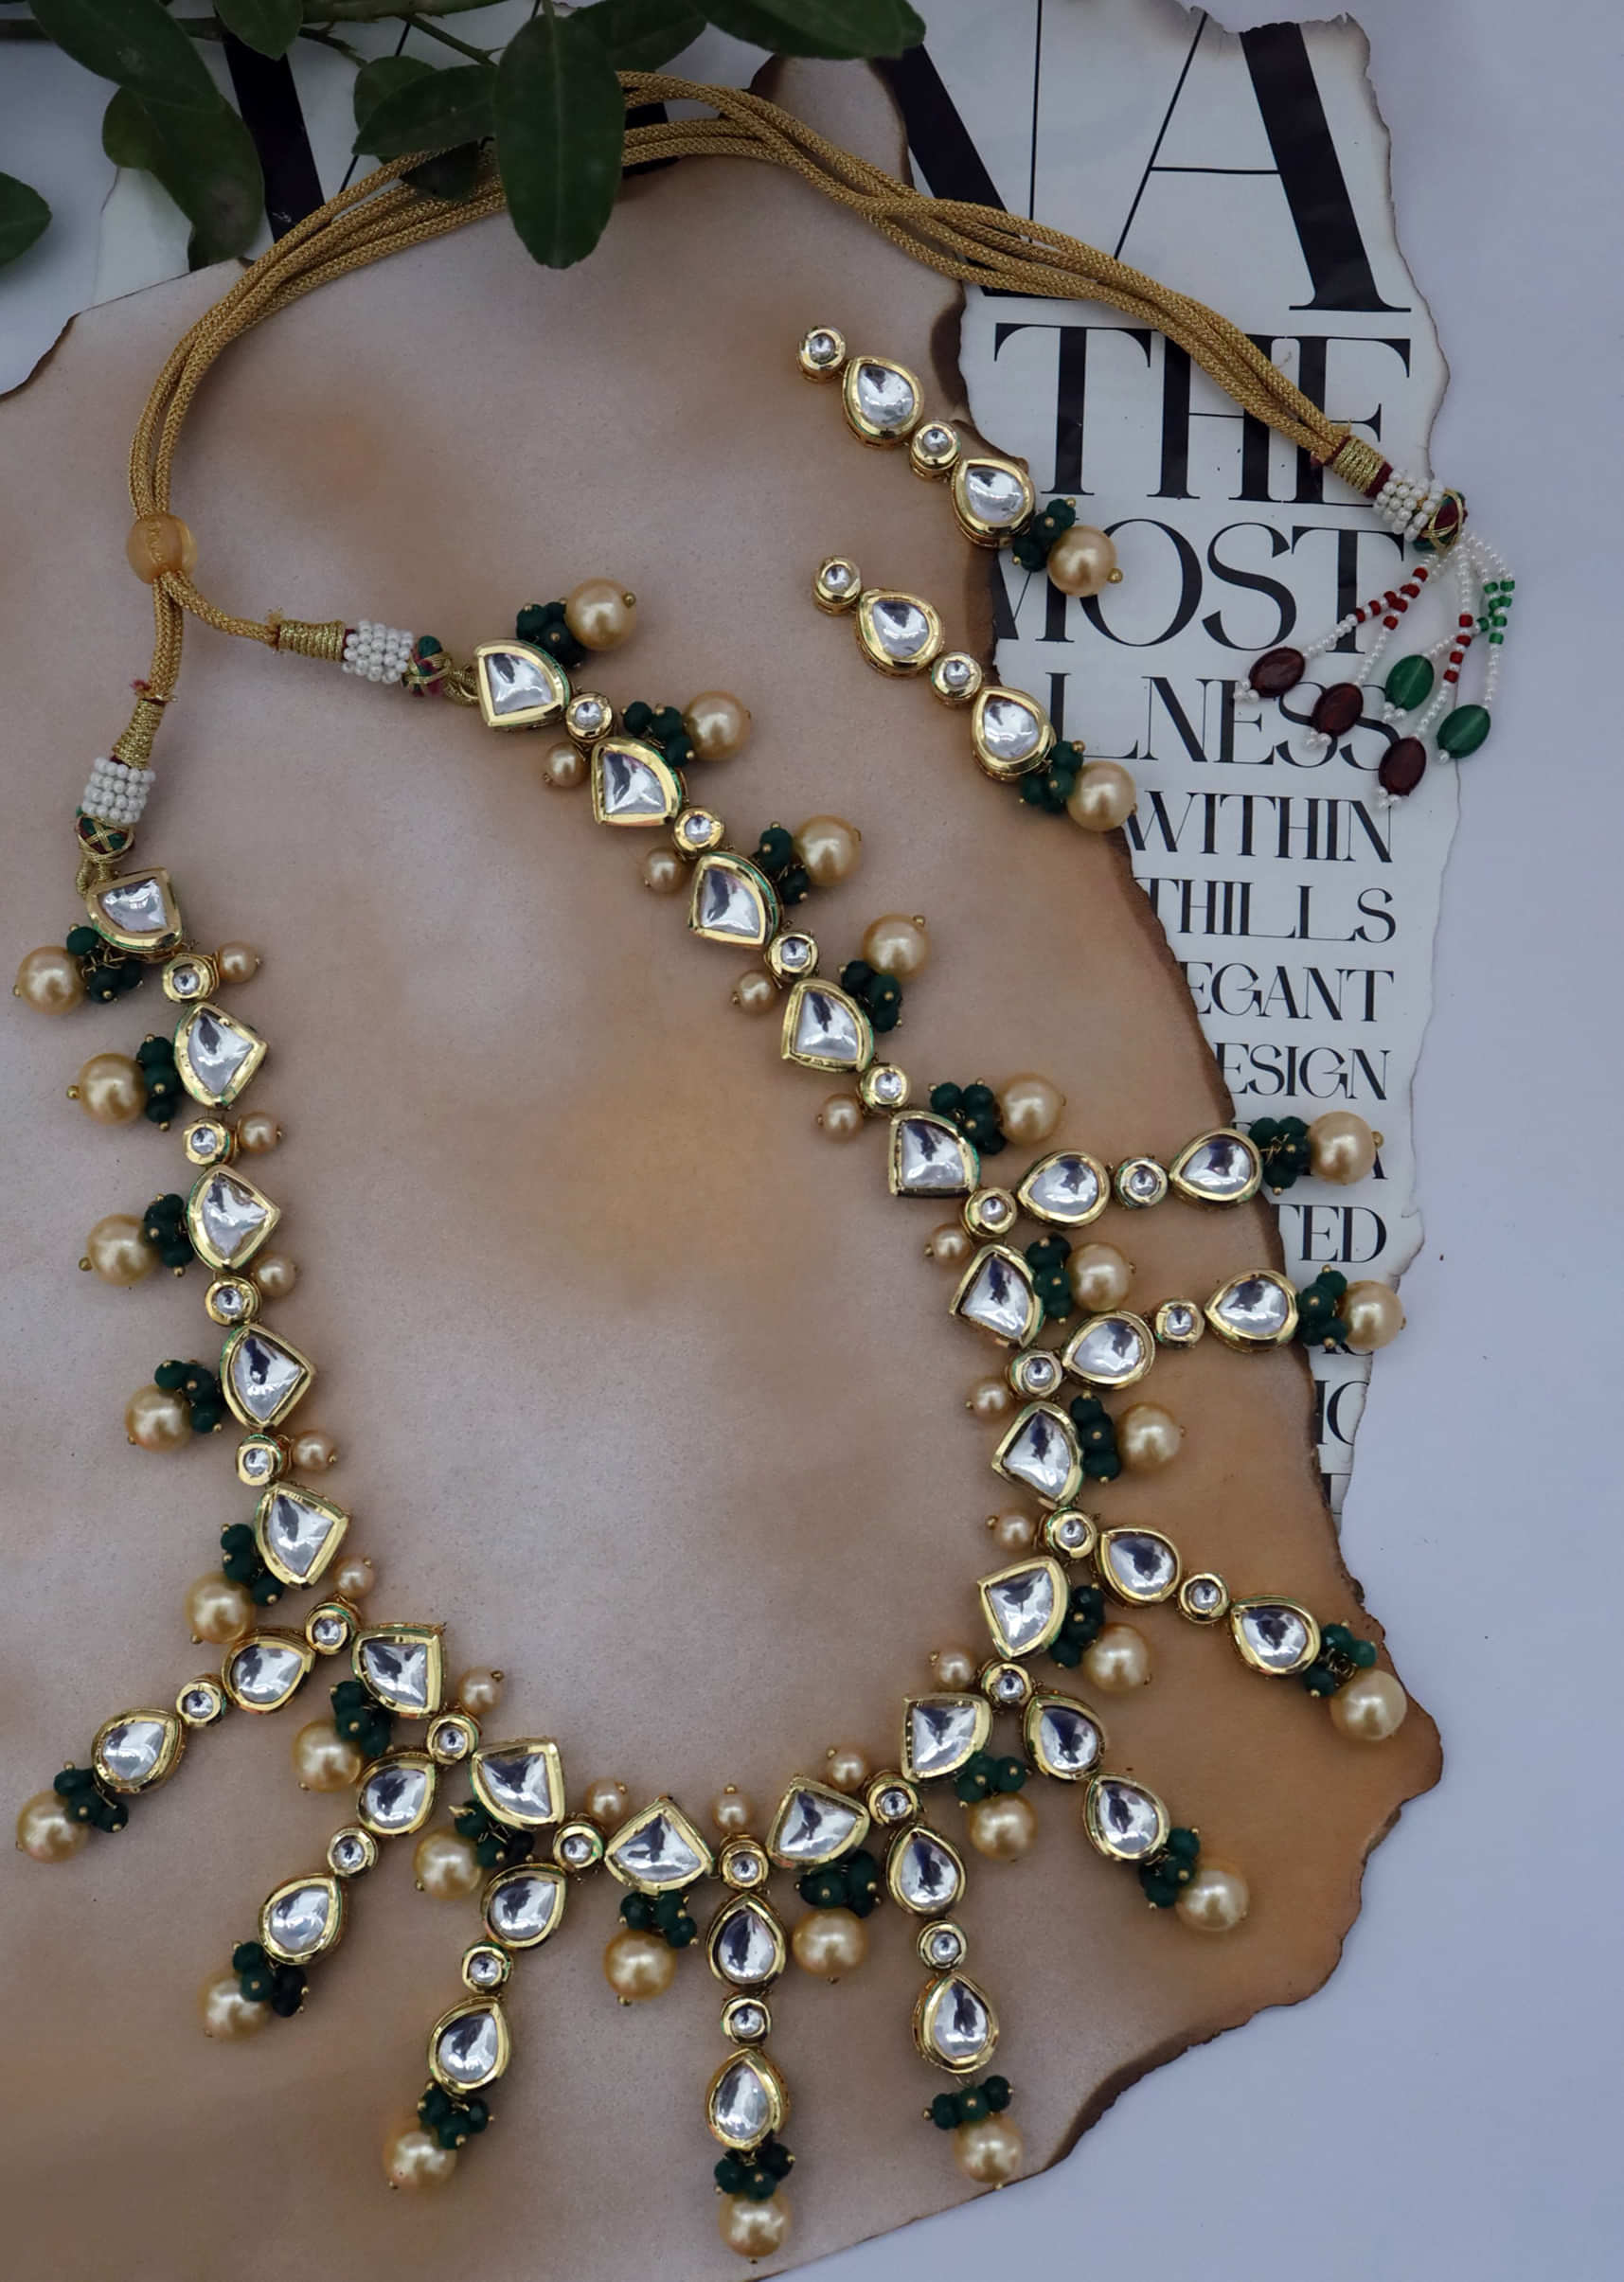 Gold And Green Necklace Set With Kundan, Pearls And Green Stones In An Edgy Design By Paisley Pop